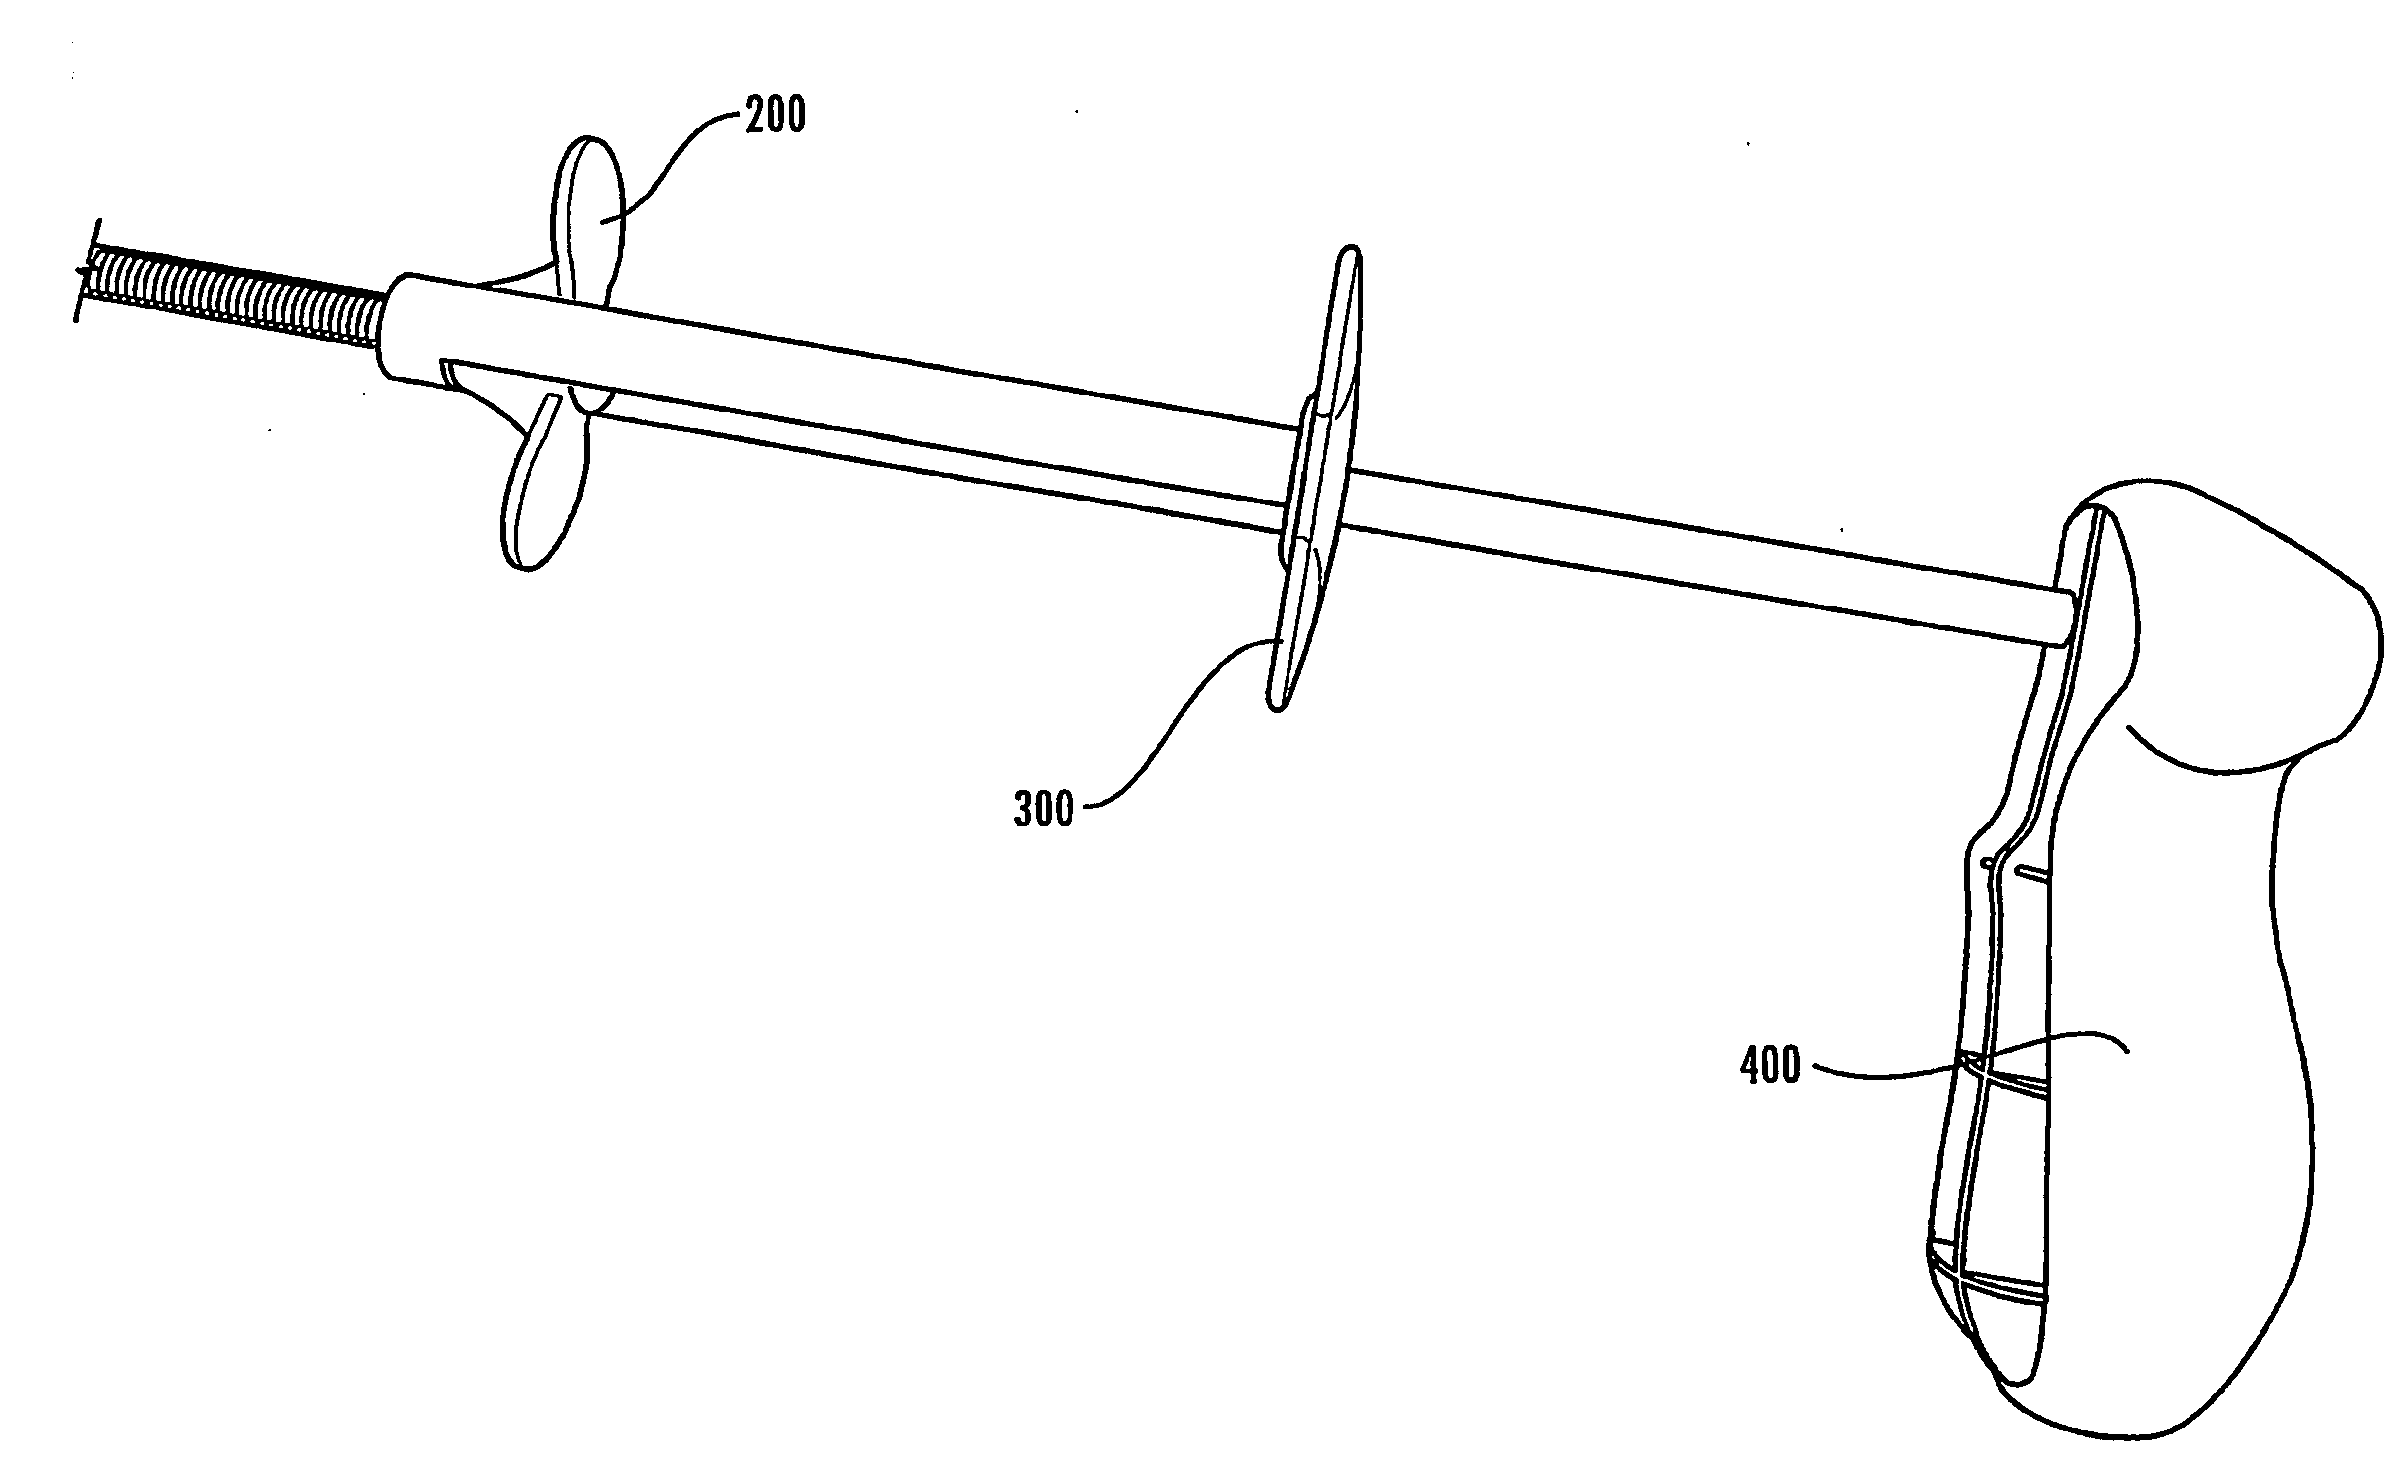 Implantable device delivery system handle and method of use